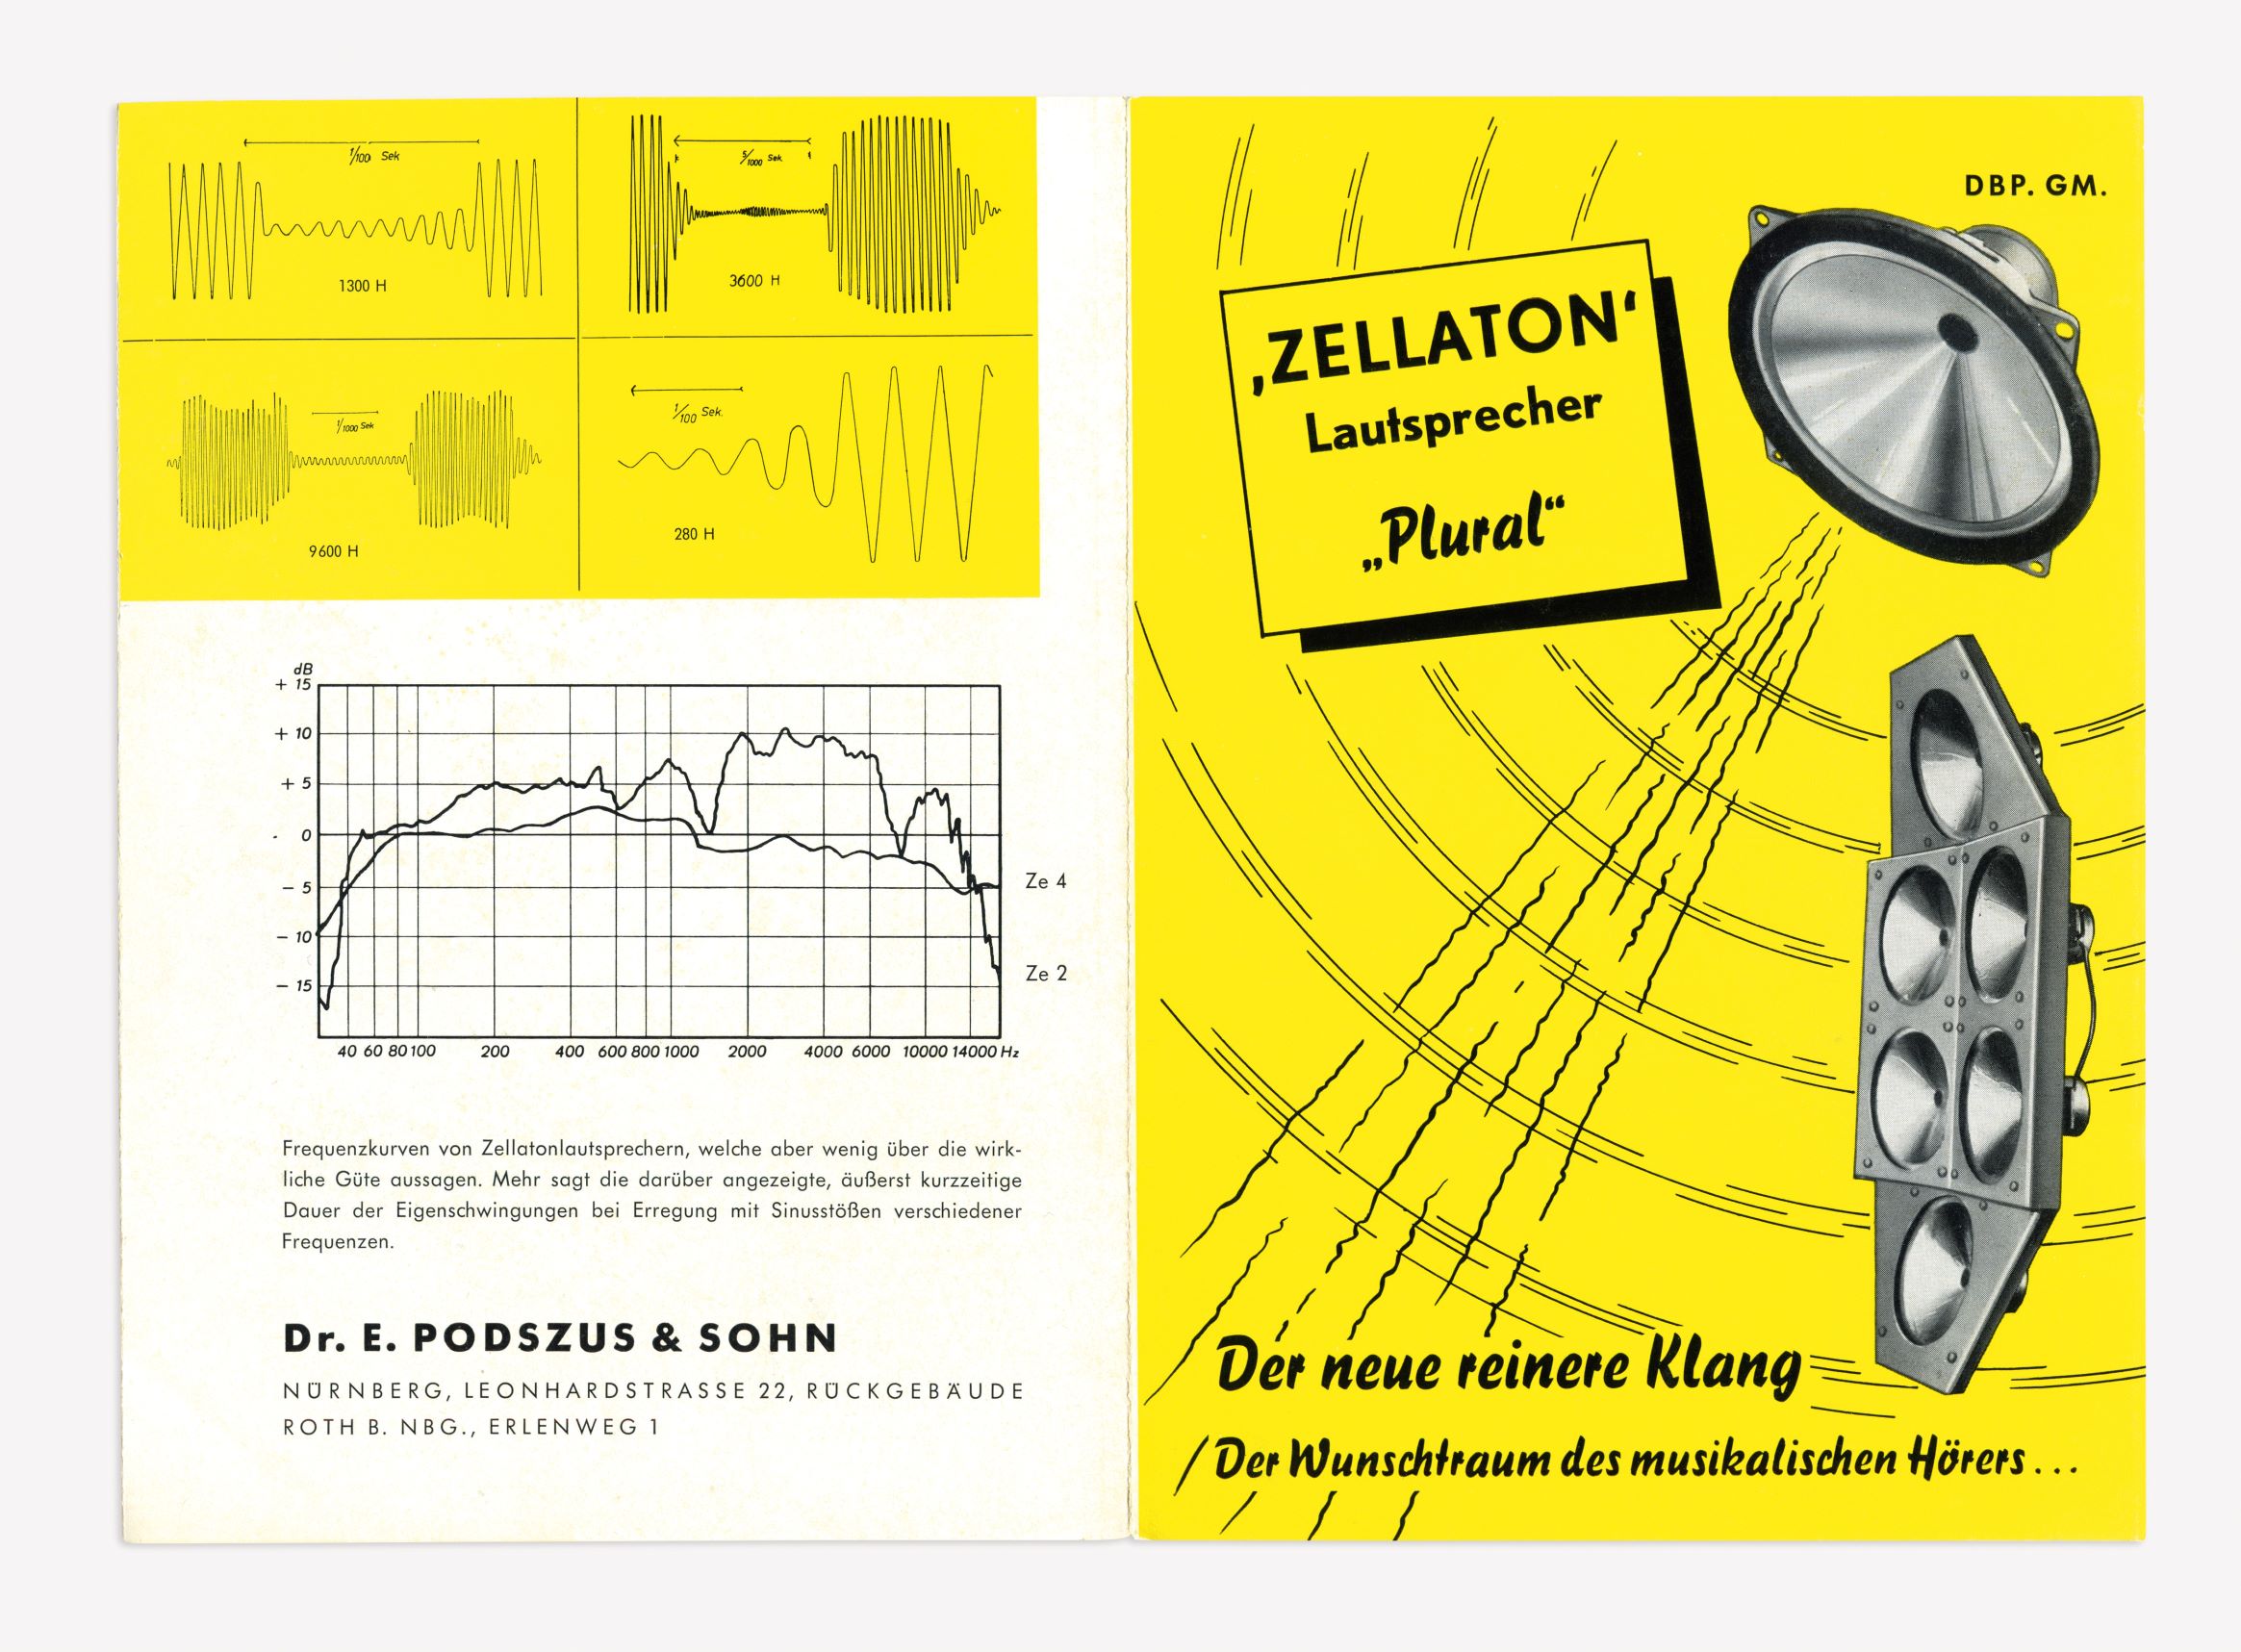 Promotional brochure for the Plural Loudspeakers, Zellaton, late 1950s